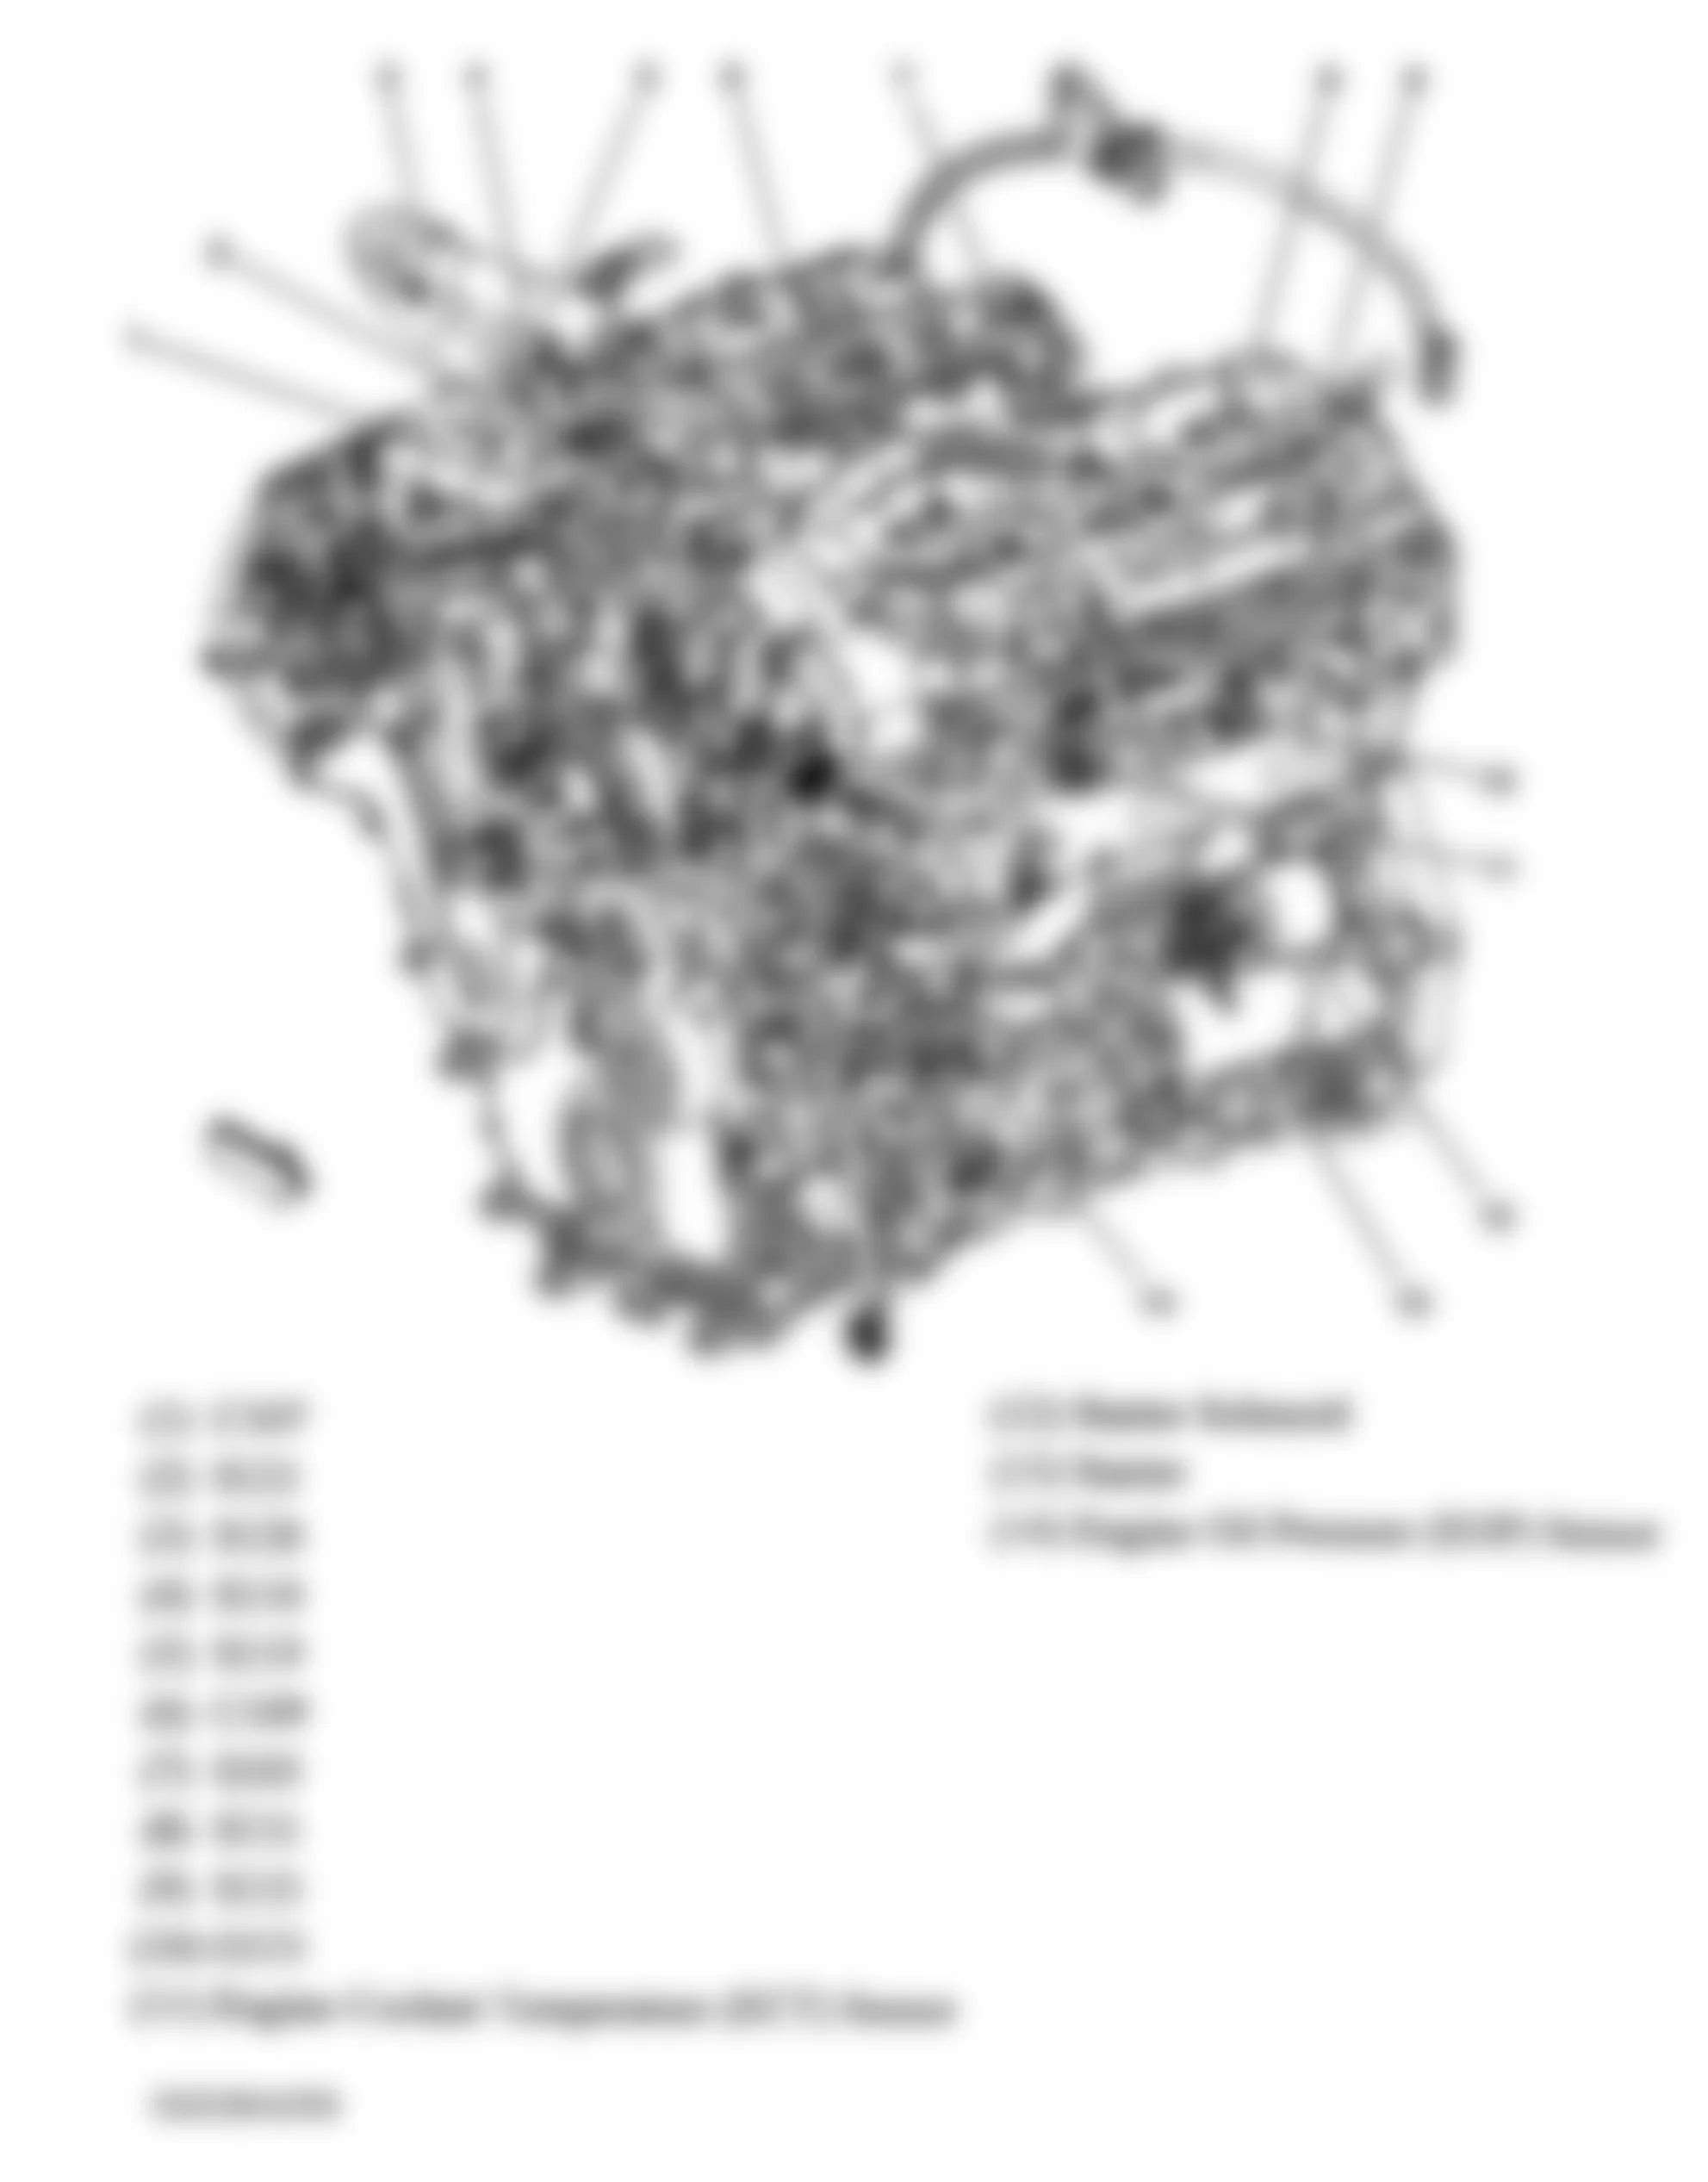 Buick Allure CXS 2006 - Component Locations -  Front Of Engine (3.6L)